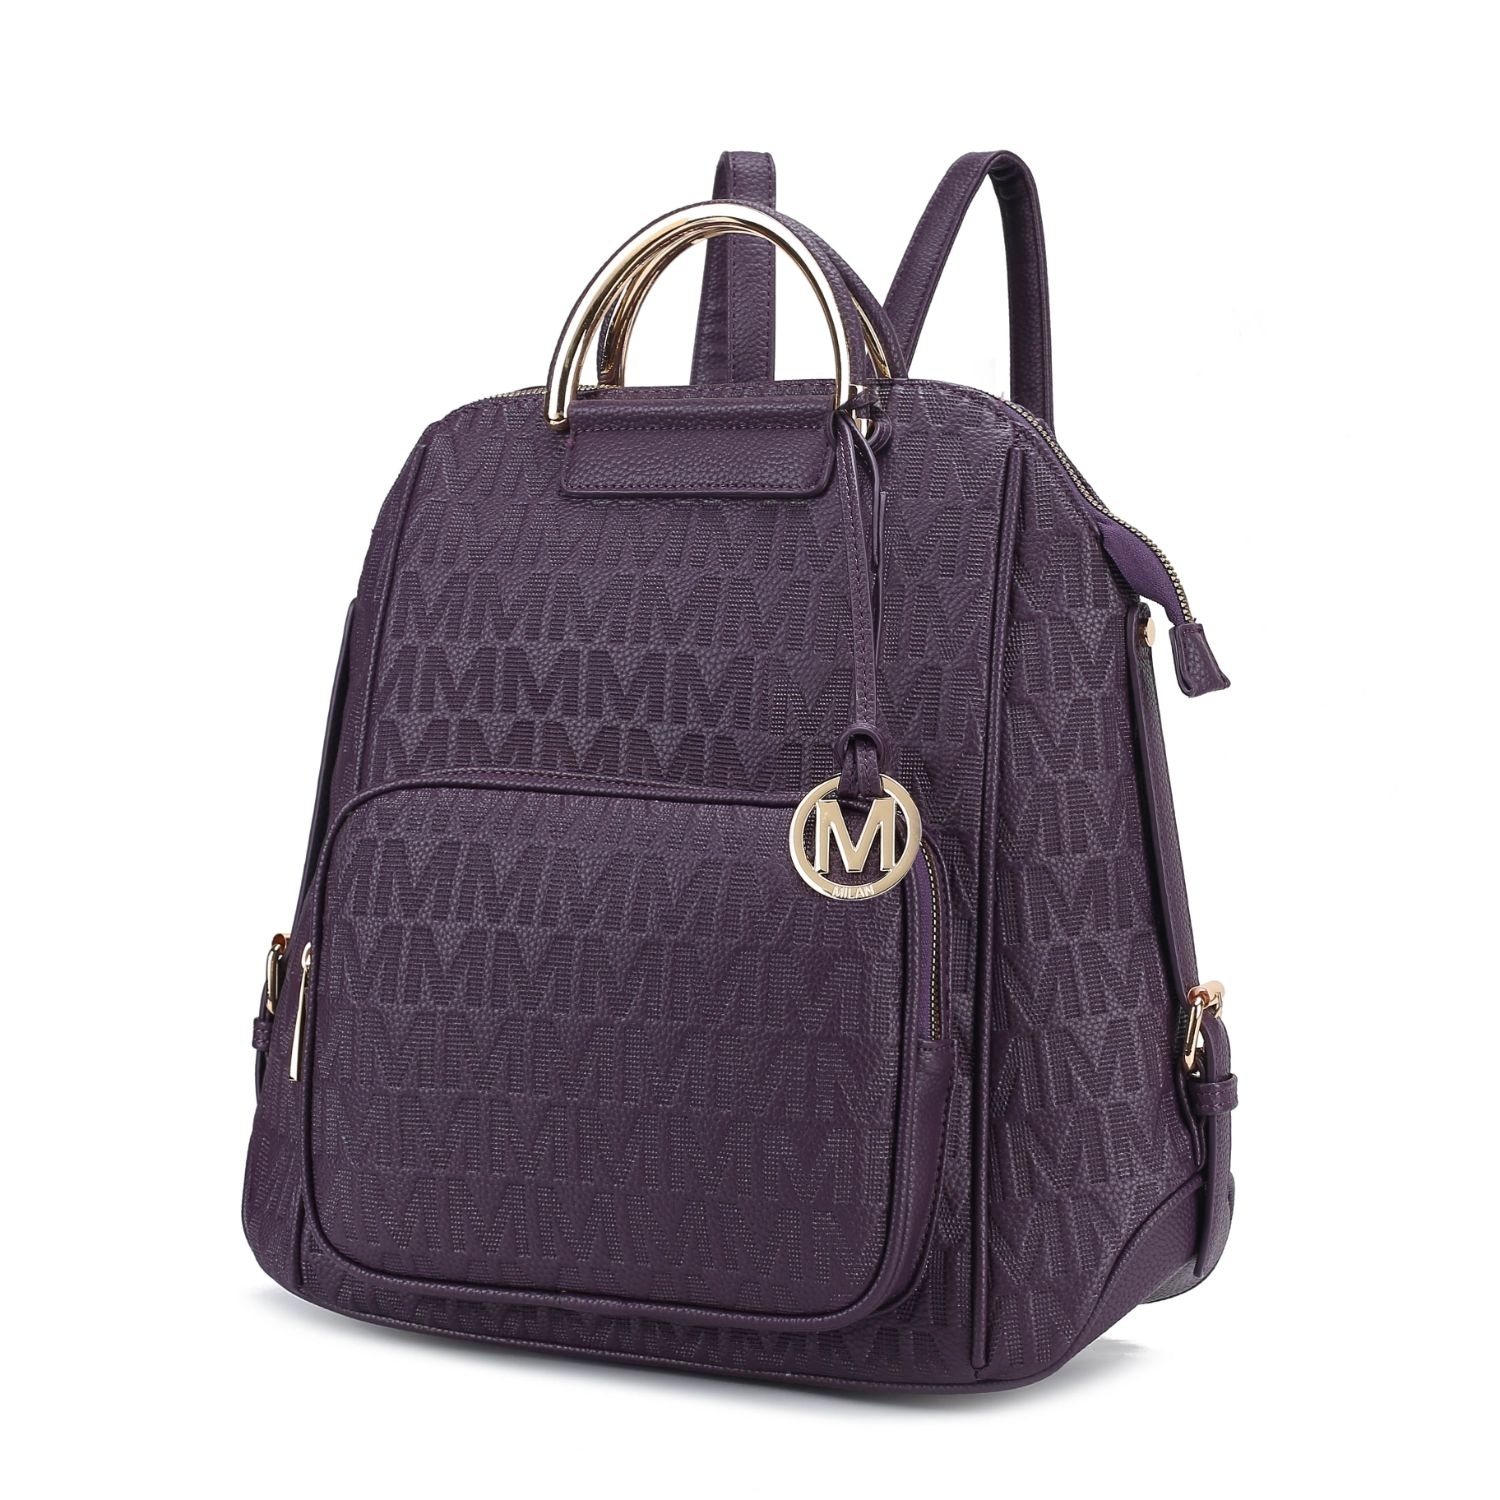 MKF Collection Torra Milan .M. Signature Trendy Backpack By Mia K. - Camel